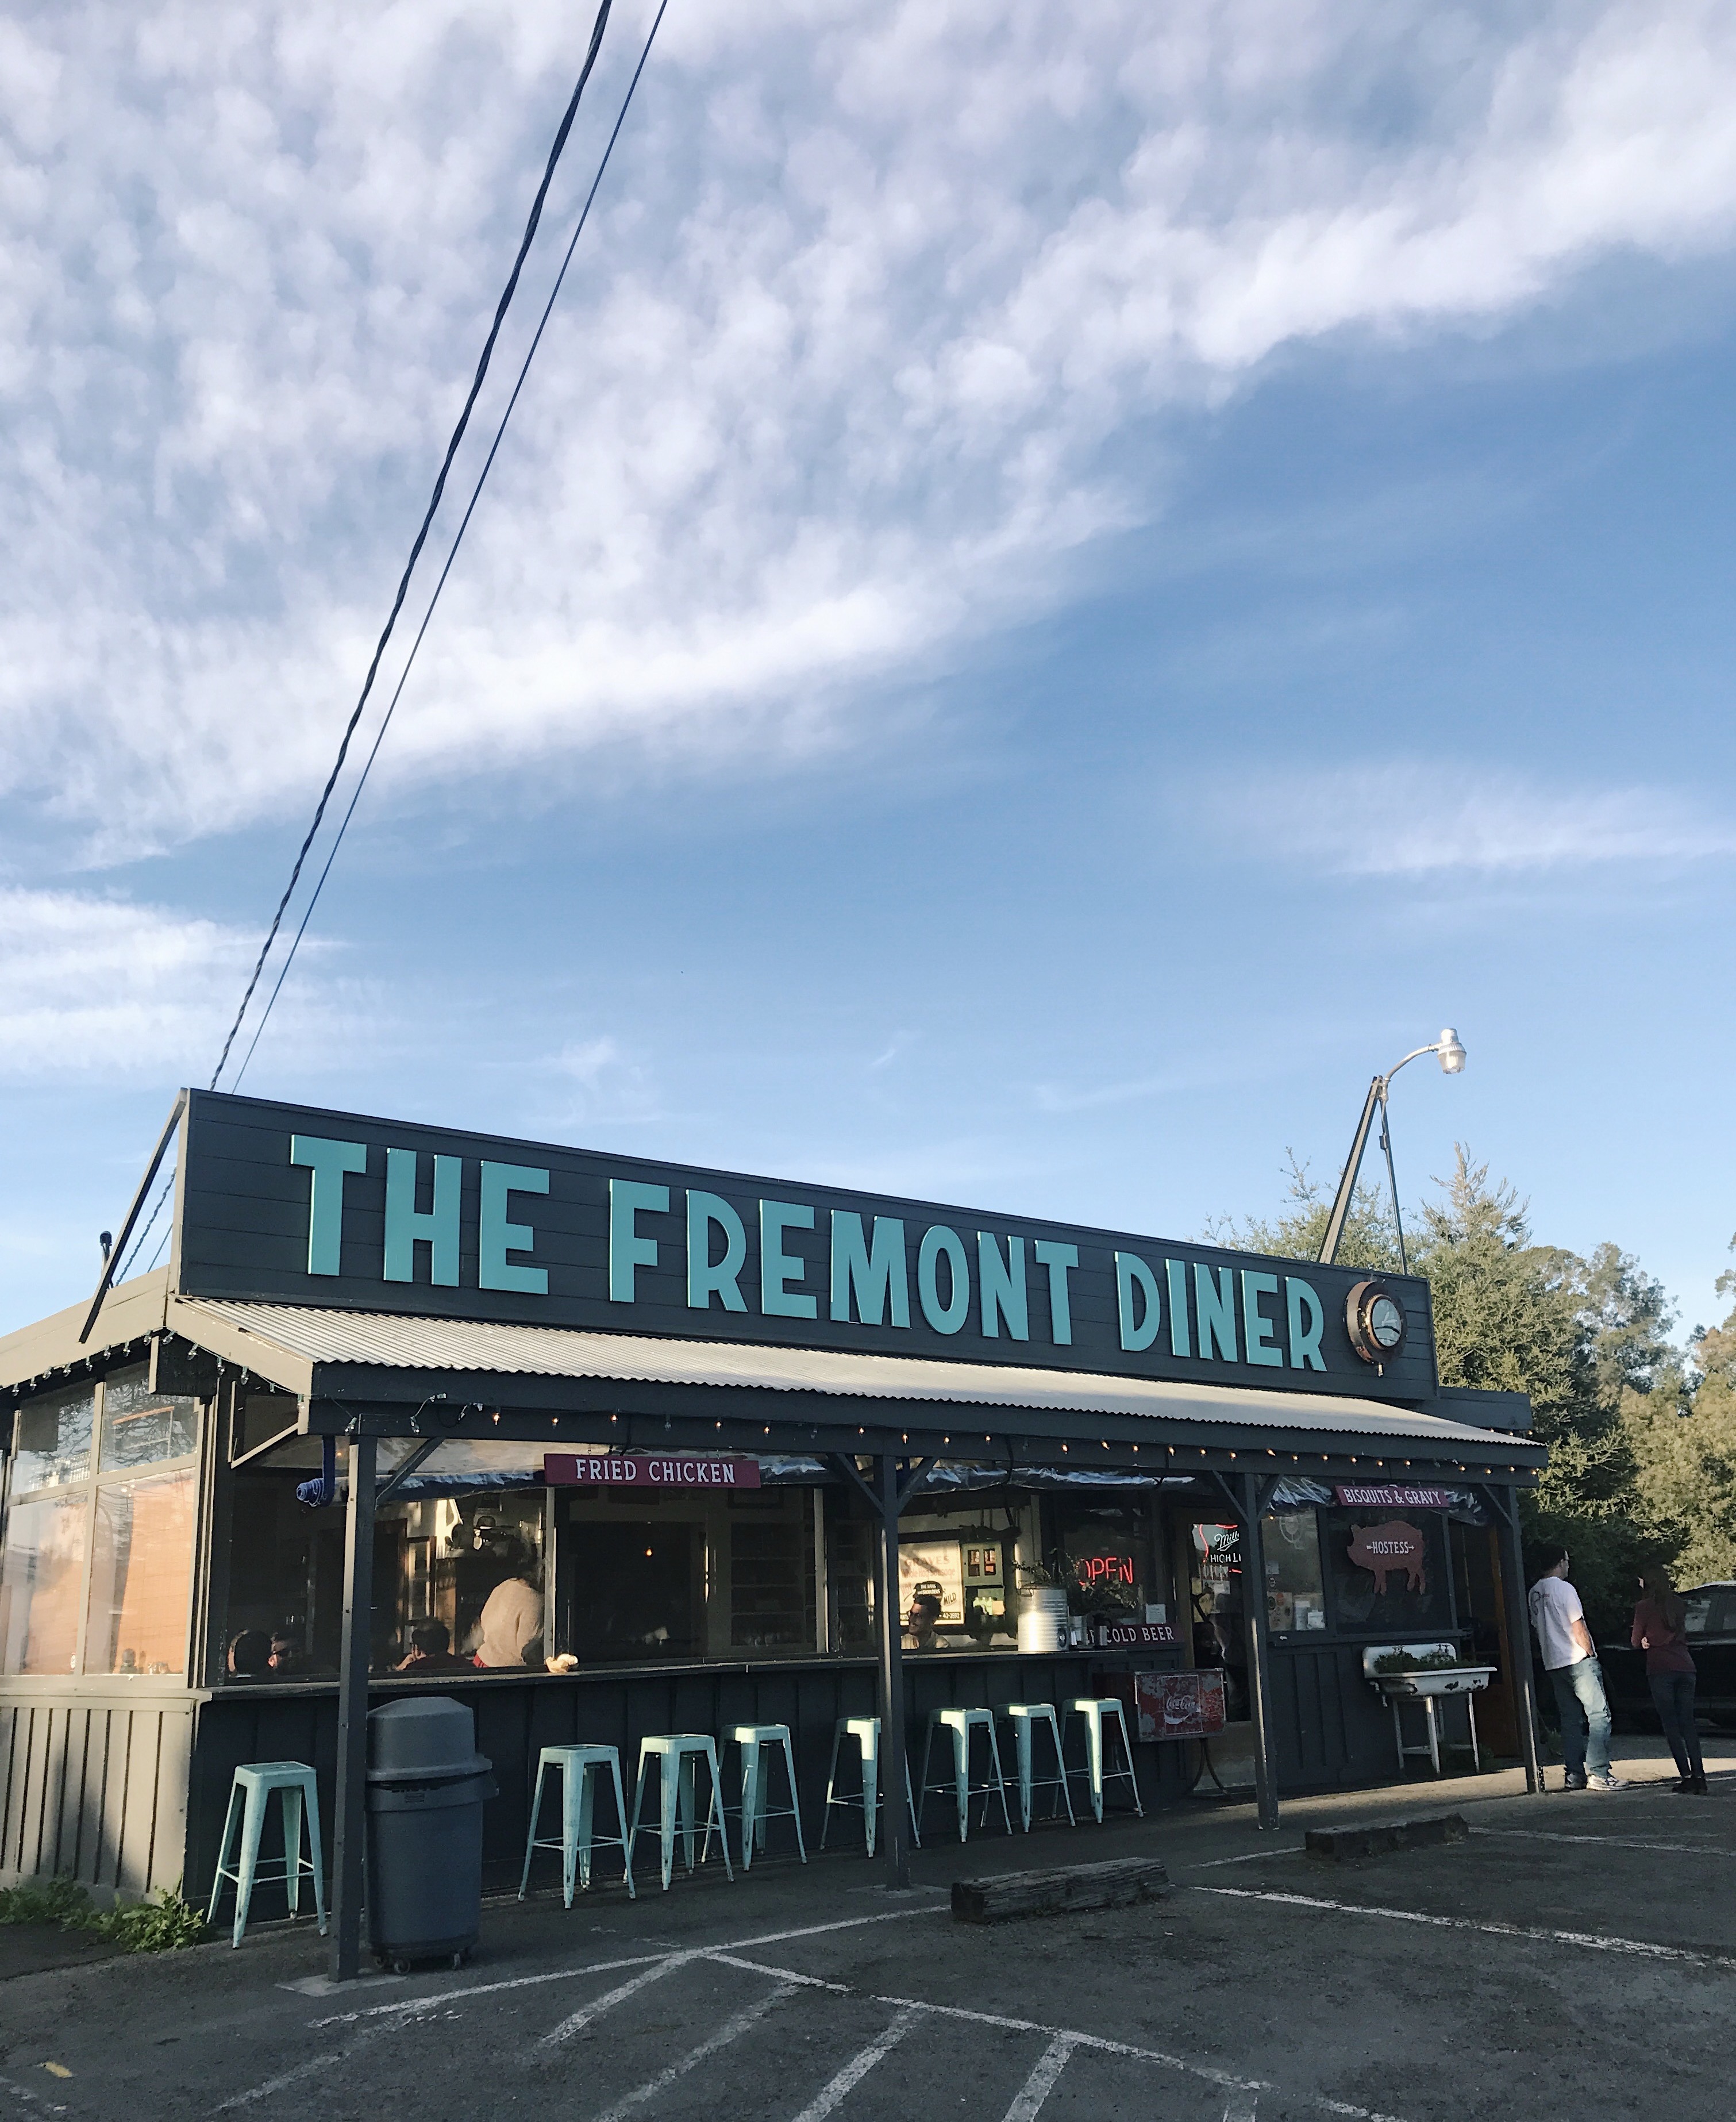 A Roadtrip to Wine Country, California with Enterprise CarShare // The Fremont Diner